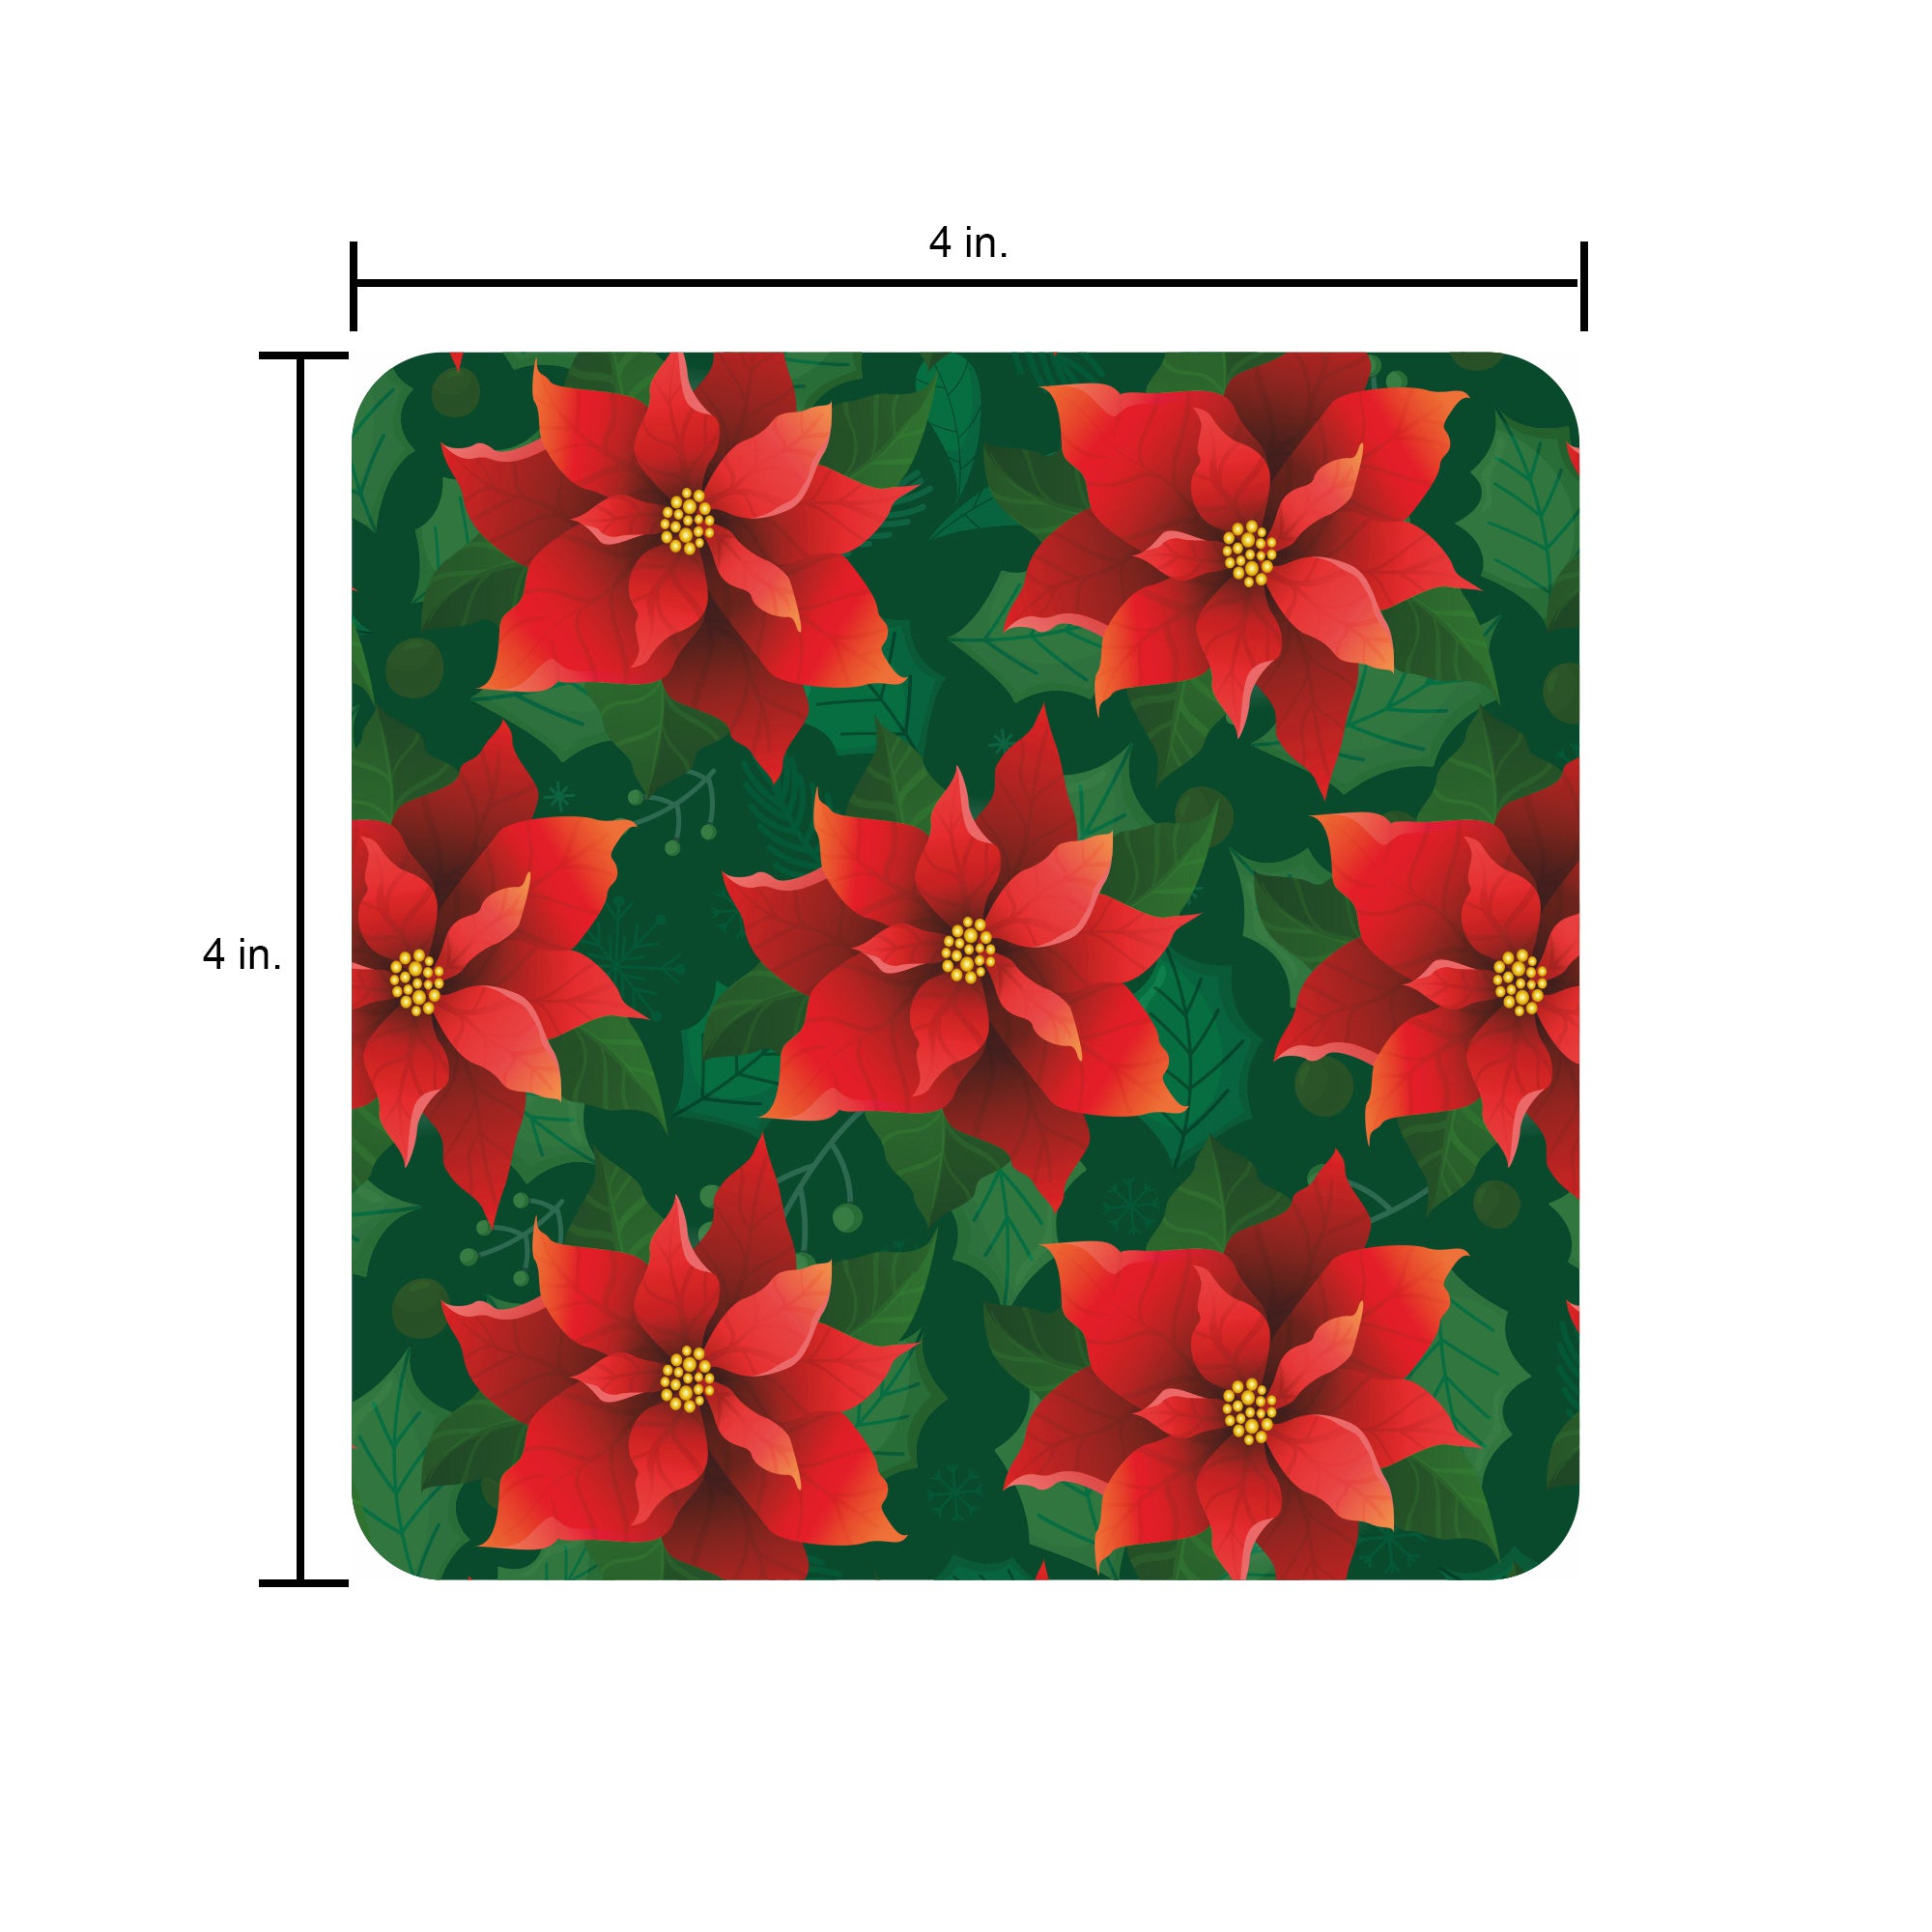 Foil Printed Christmas Placemat & Coaster Set - W12 x H15 inches,W4 x H4 inches, Poinsettia, 6pc